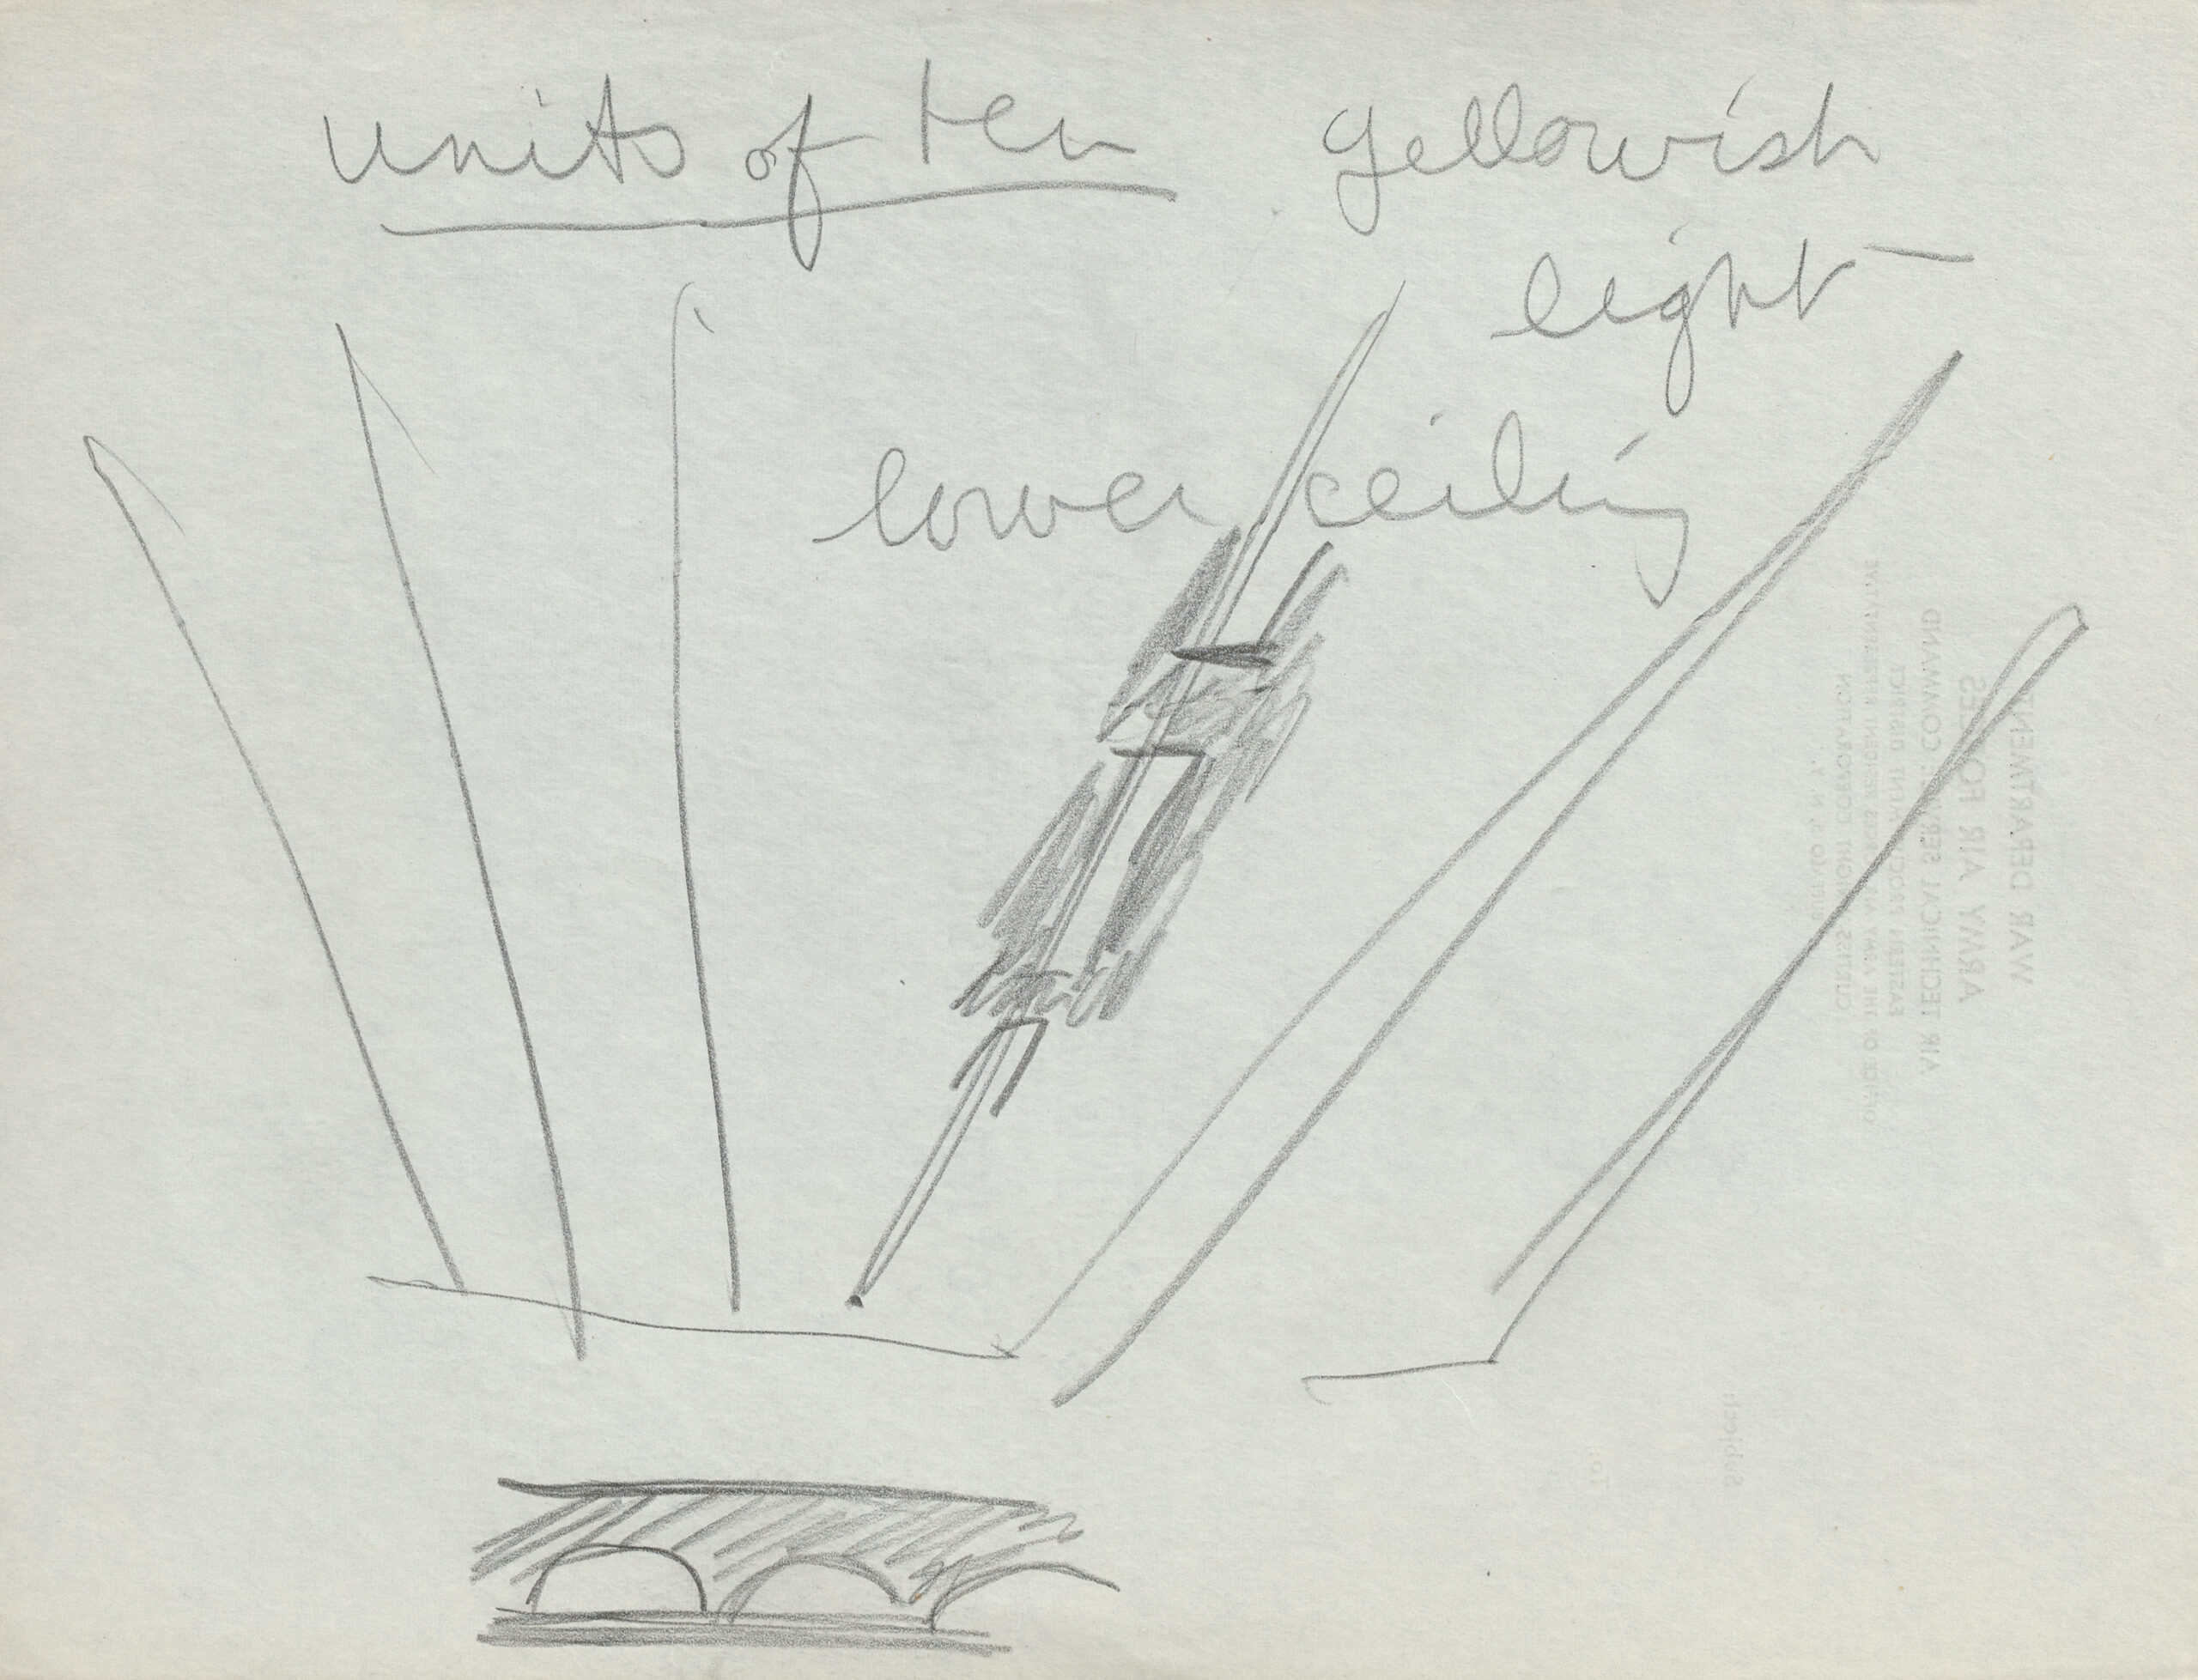 Pencil sketch of an aircraft factory ceiling with notations.